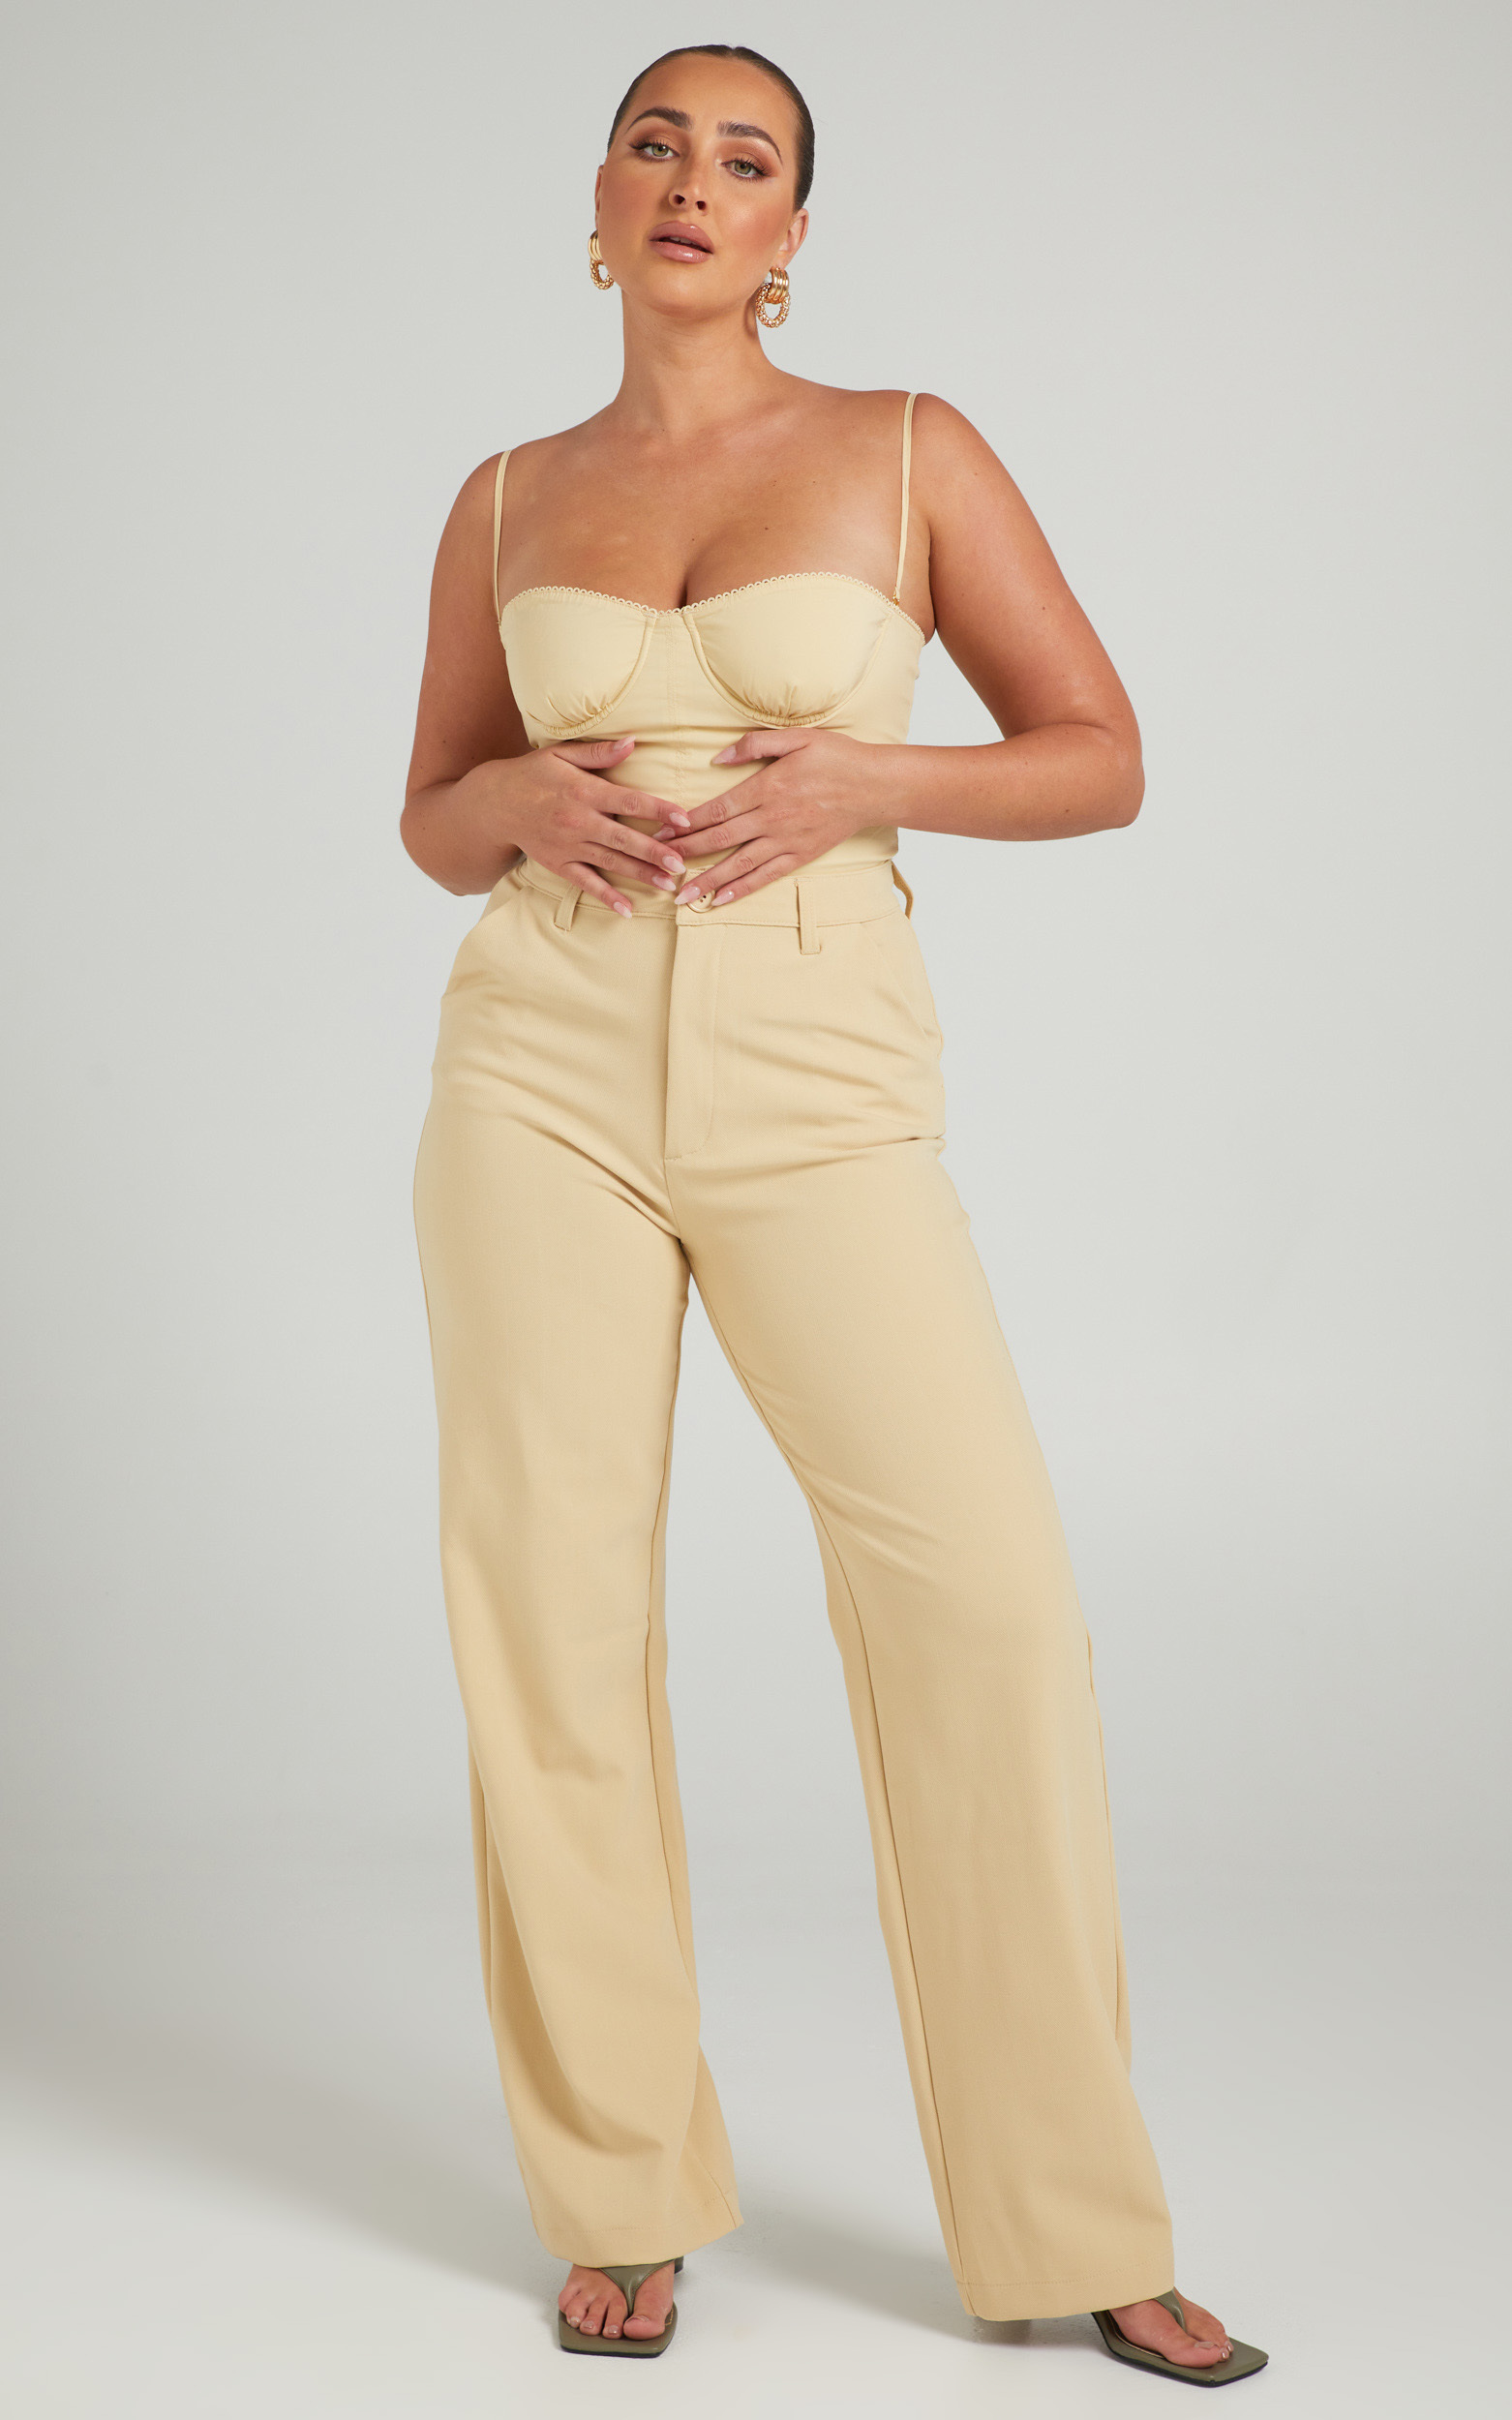 Danielle Bernstein - High Waisted Classic Trouser in Taupe - 06, BRN1, hi-res image number null